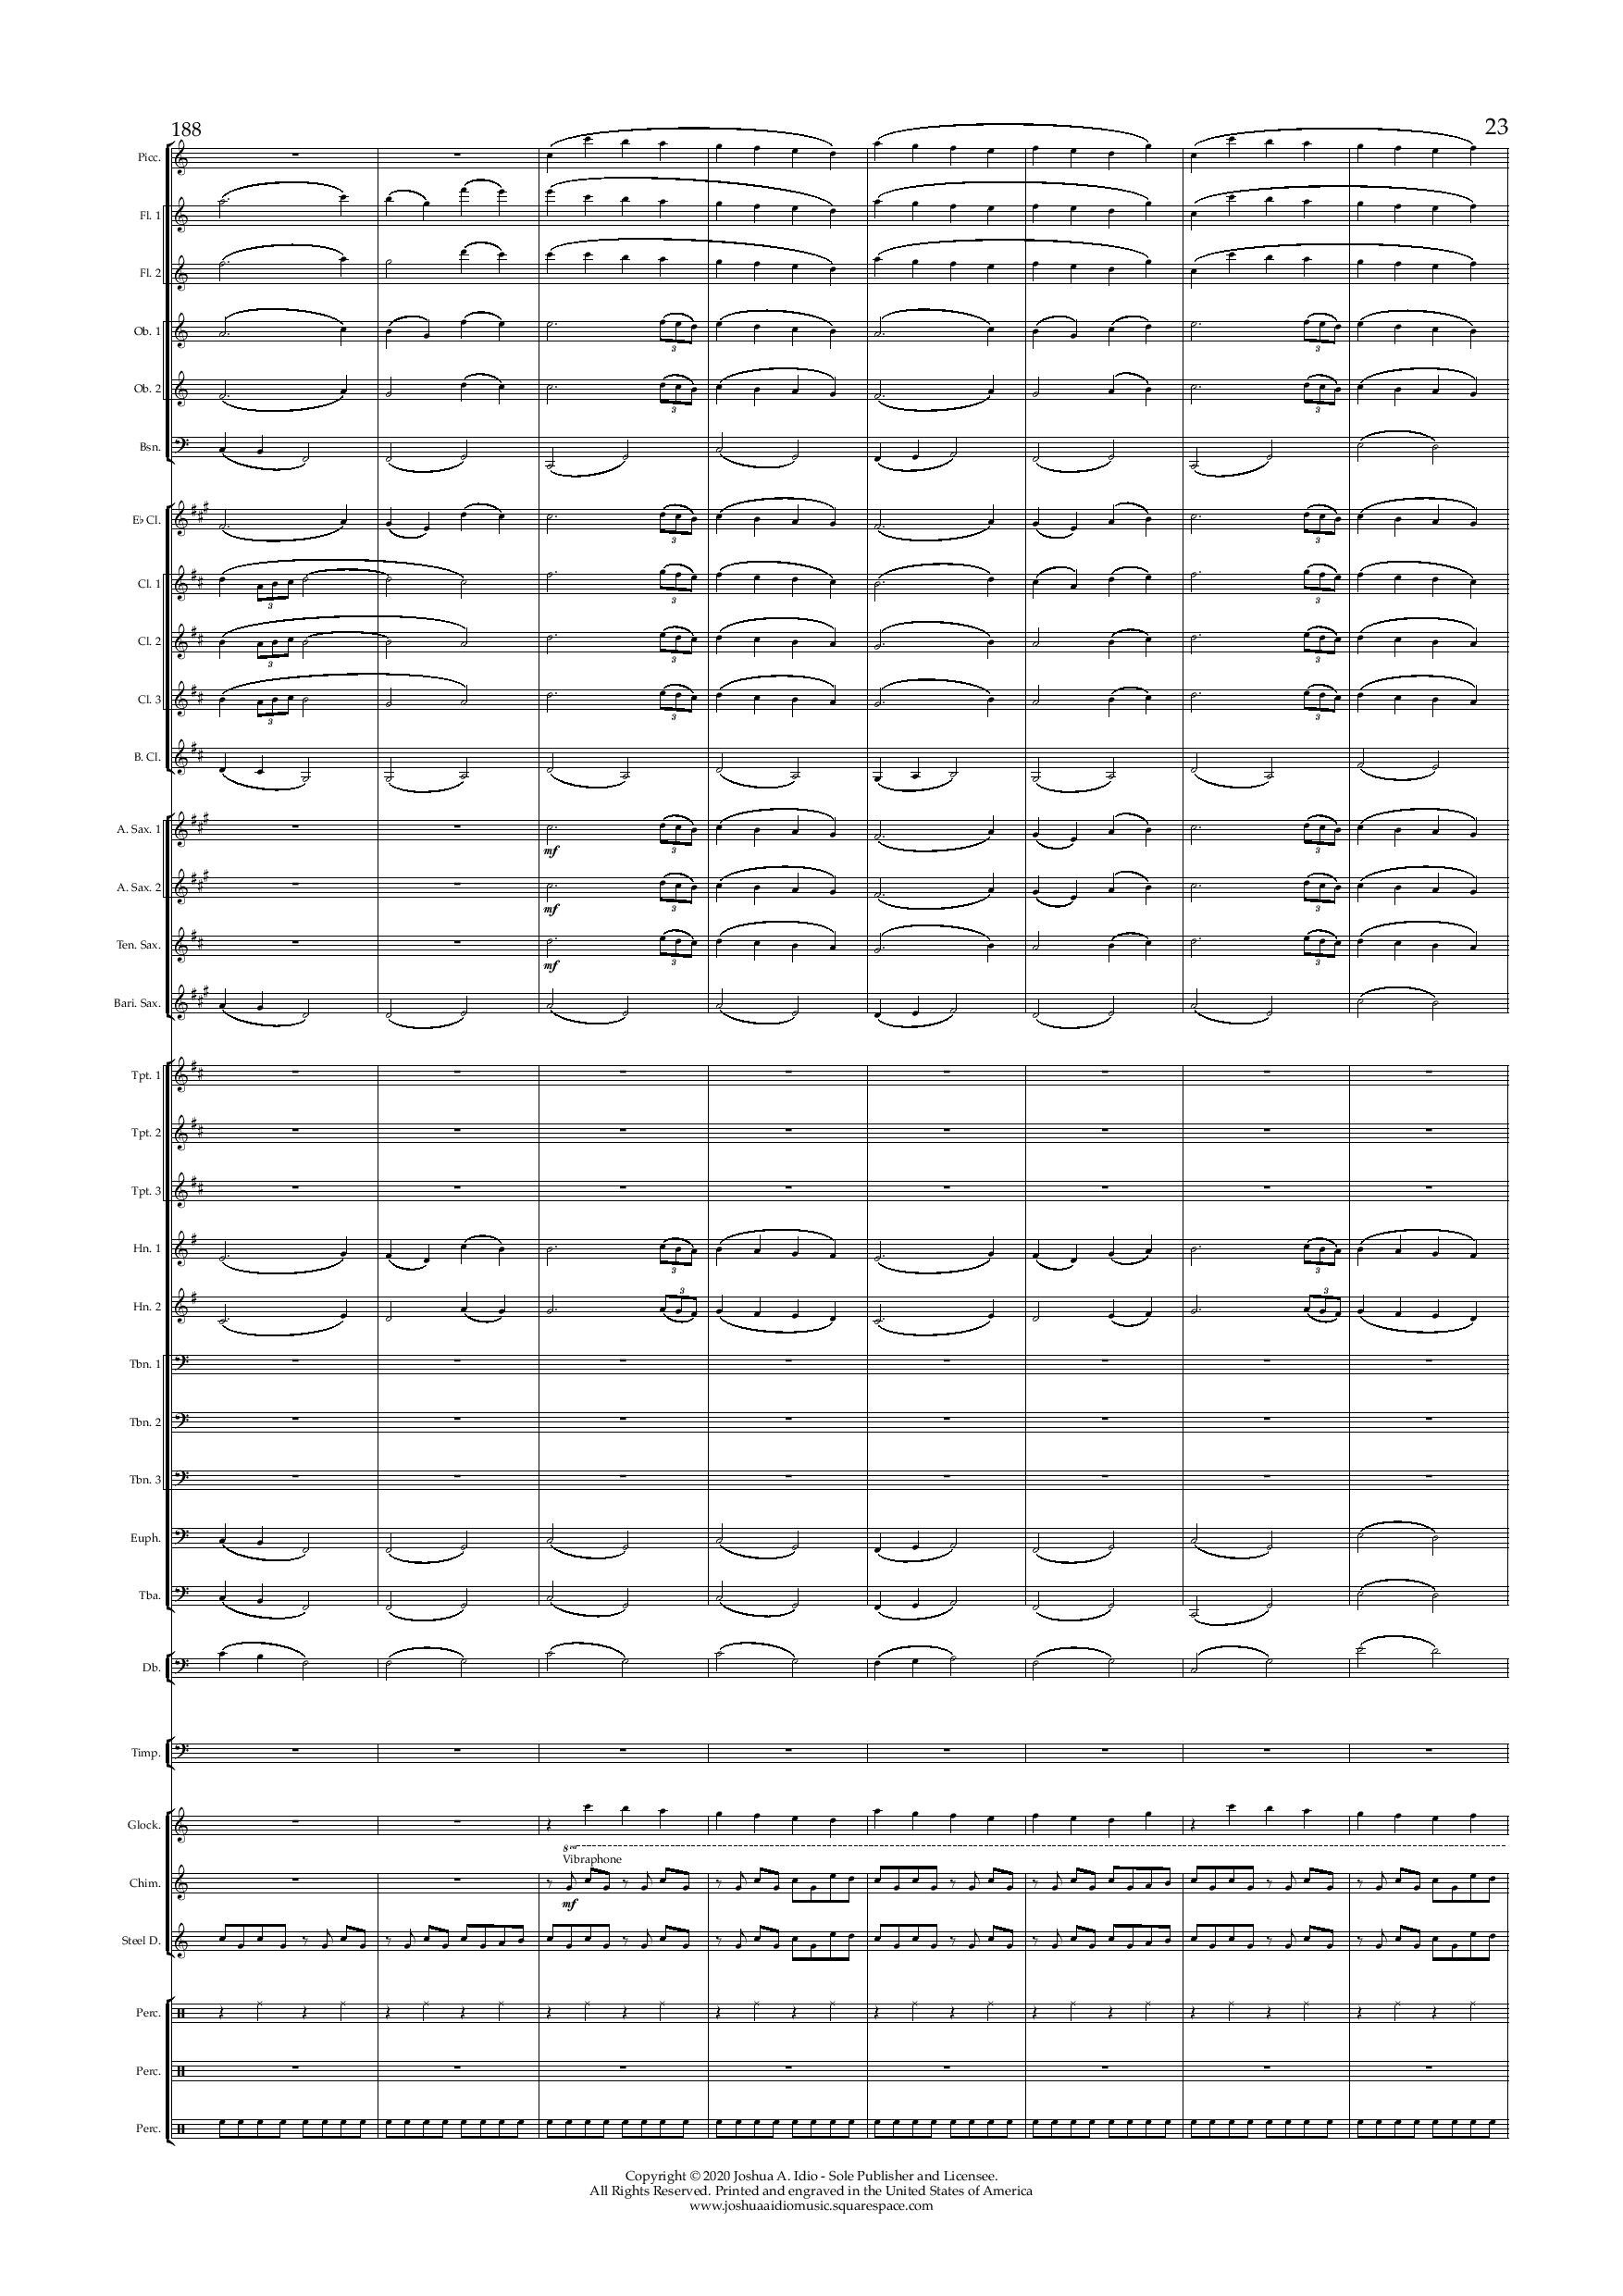 The Cruise Line Dream - Conductor s Score-page-023.jpg